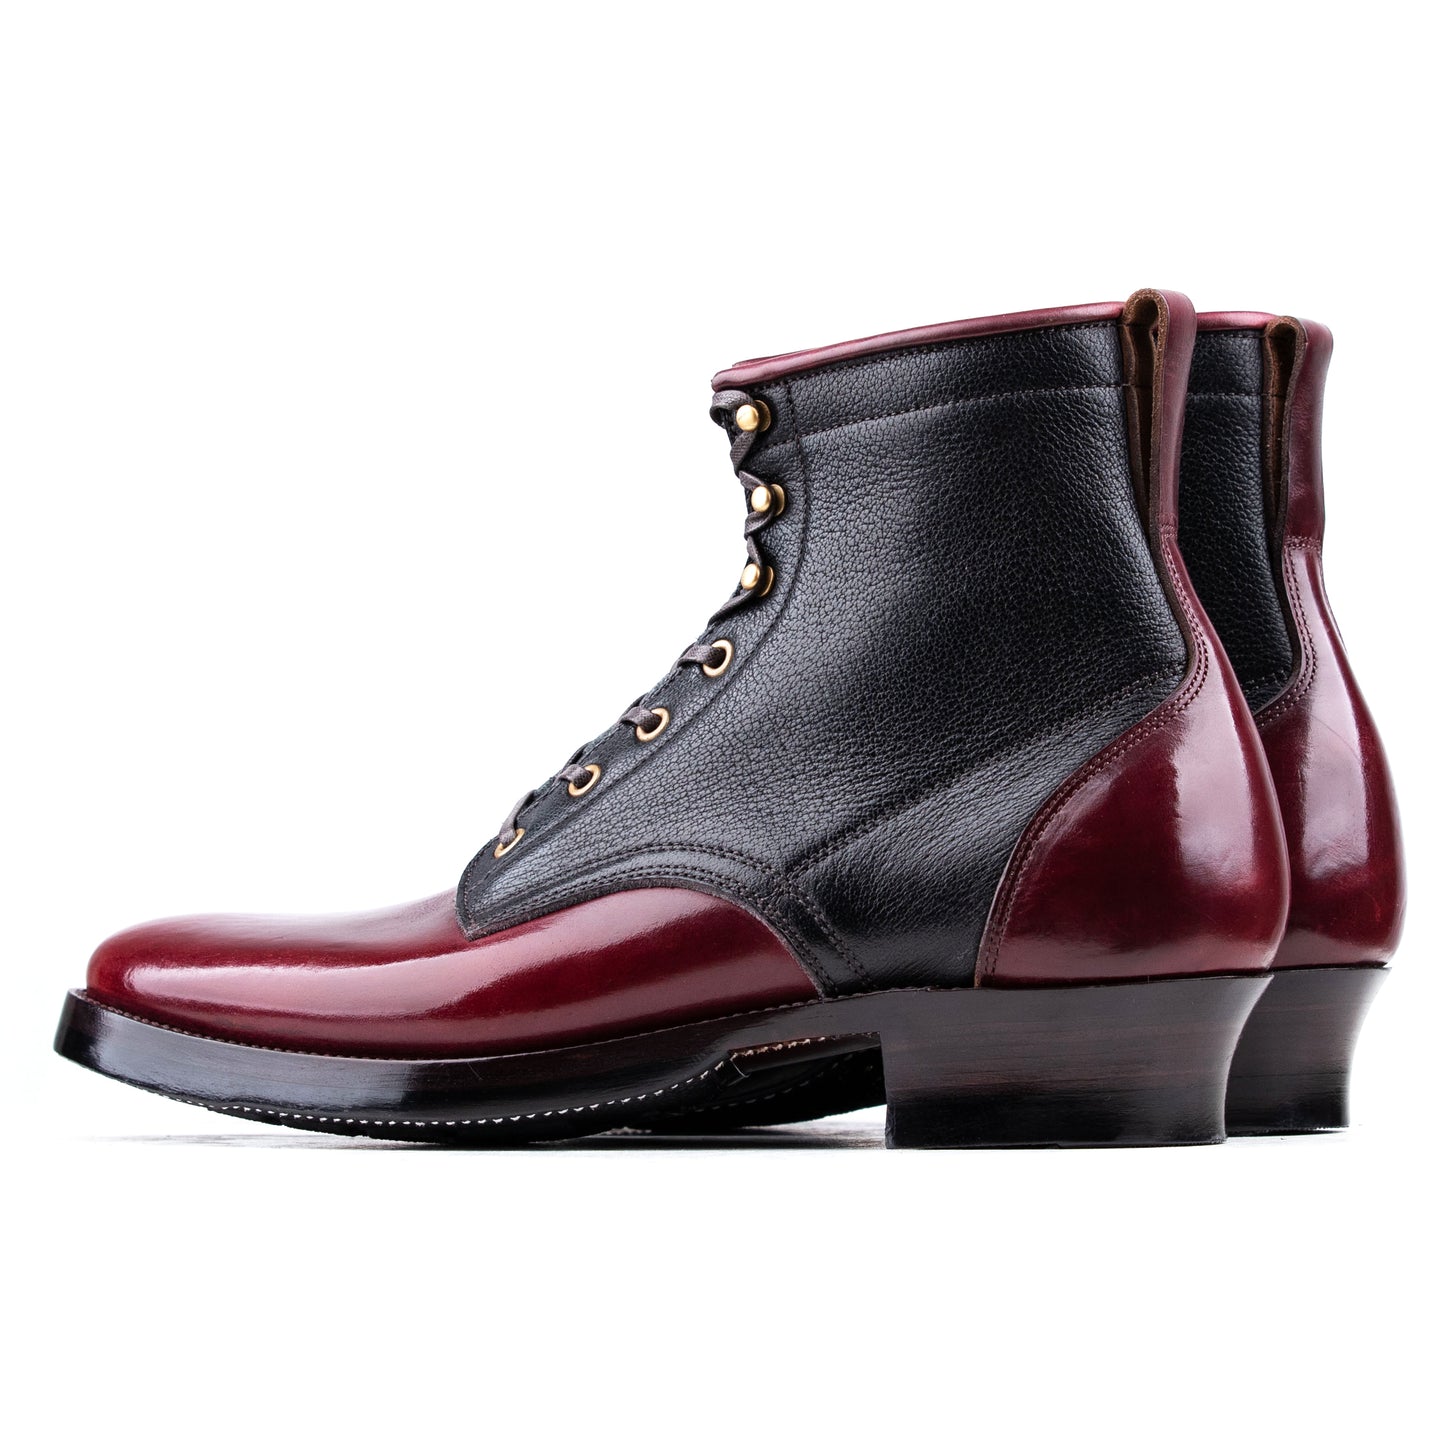 Woodcutting boots - Color 8 Chromexcel Horsbutt + Musk ox leather - xb ...